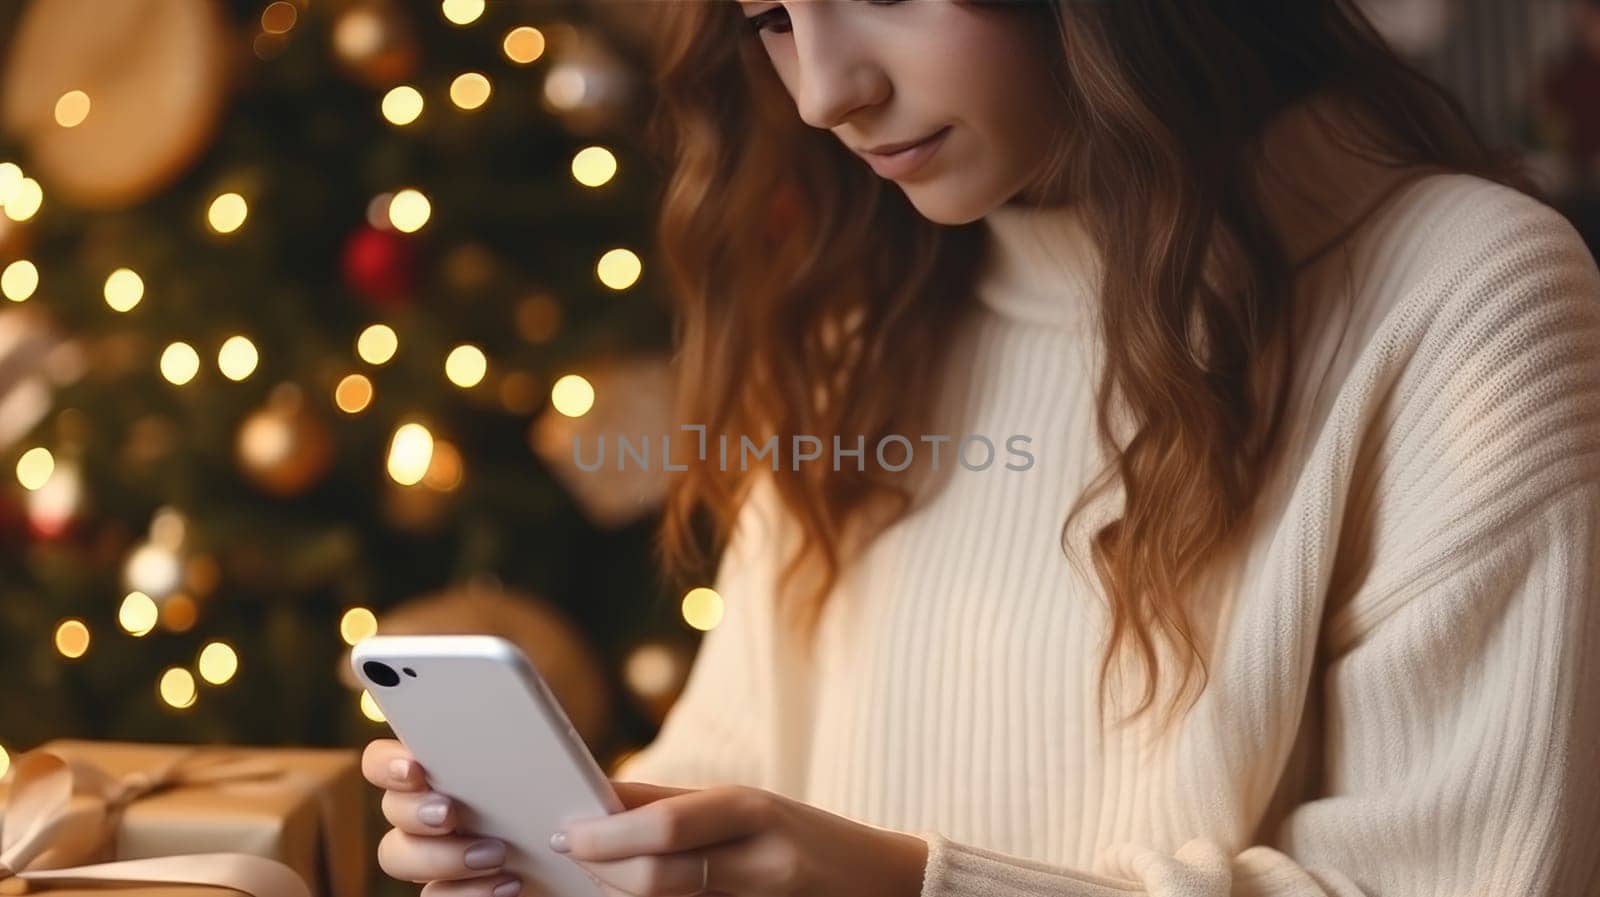 Young woman in a white sweater orders New Year's gifts during the Christmas holidays at home, using a smartphone and a credit card. by Alla_Yurtayeva